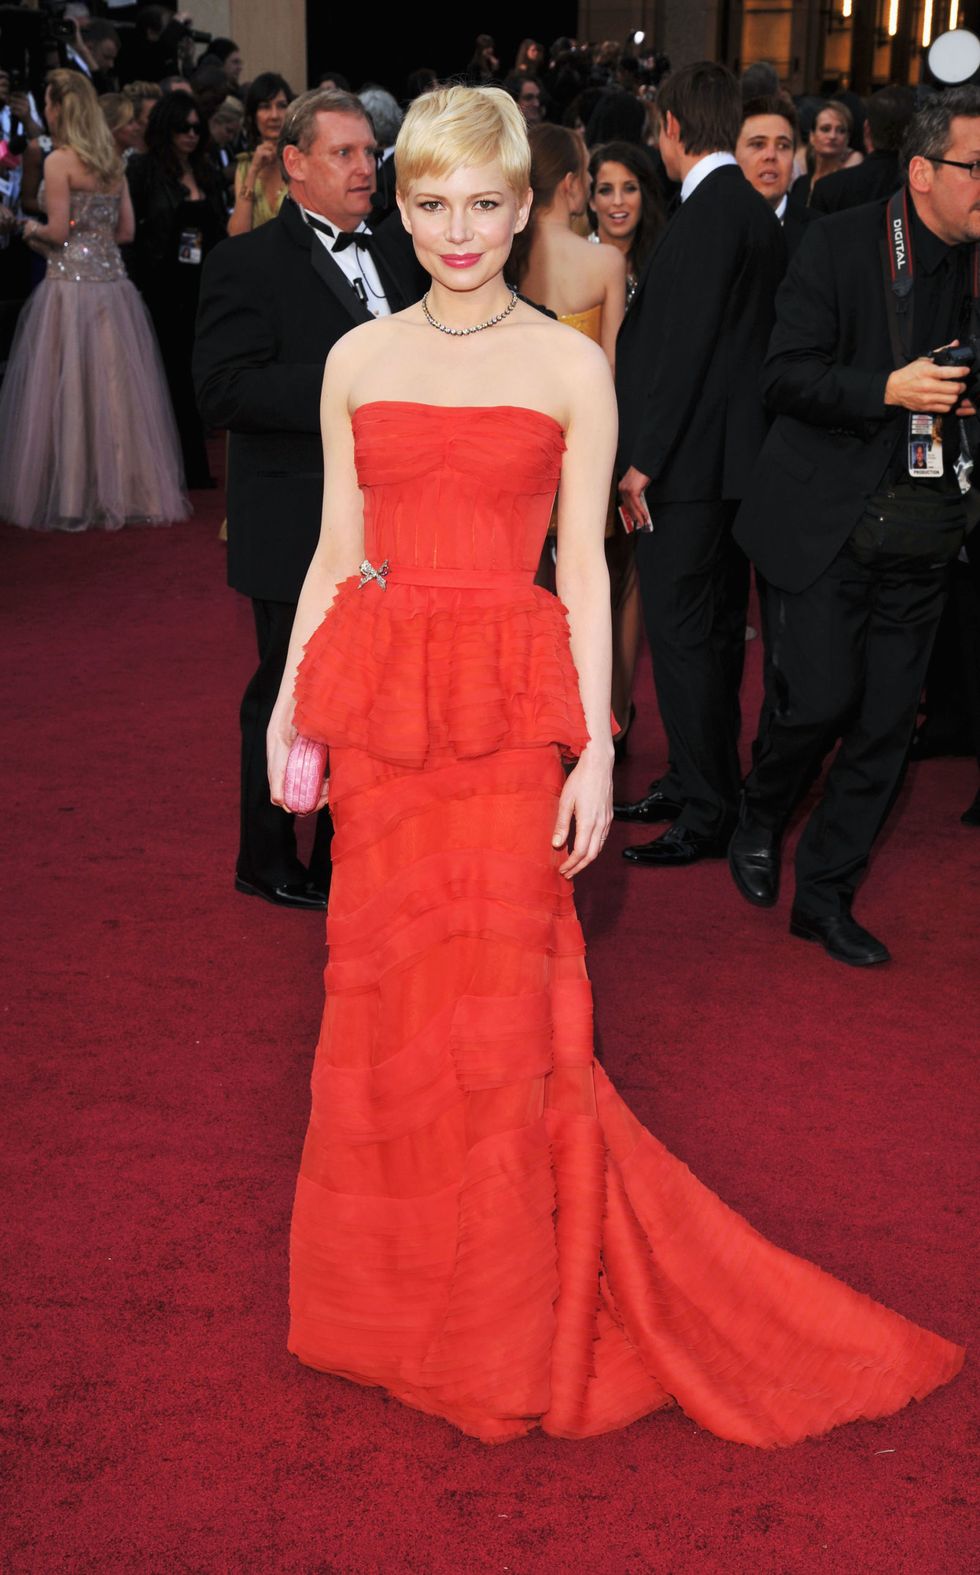 <p>Her saffron yellow gown from the 2006 Oscars is a crowd favorite, but this 2012 Oscars look by Louis Vuitton (with a super trendy peplum) was pretty unforgettable, too. </p>